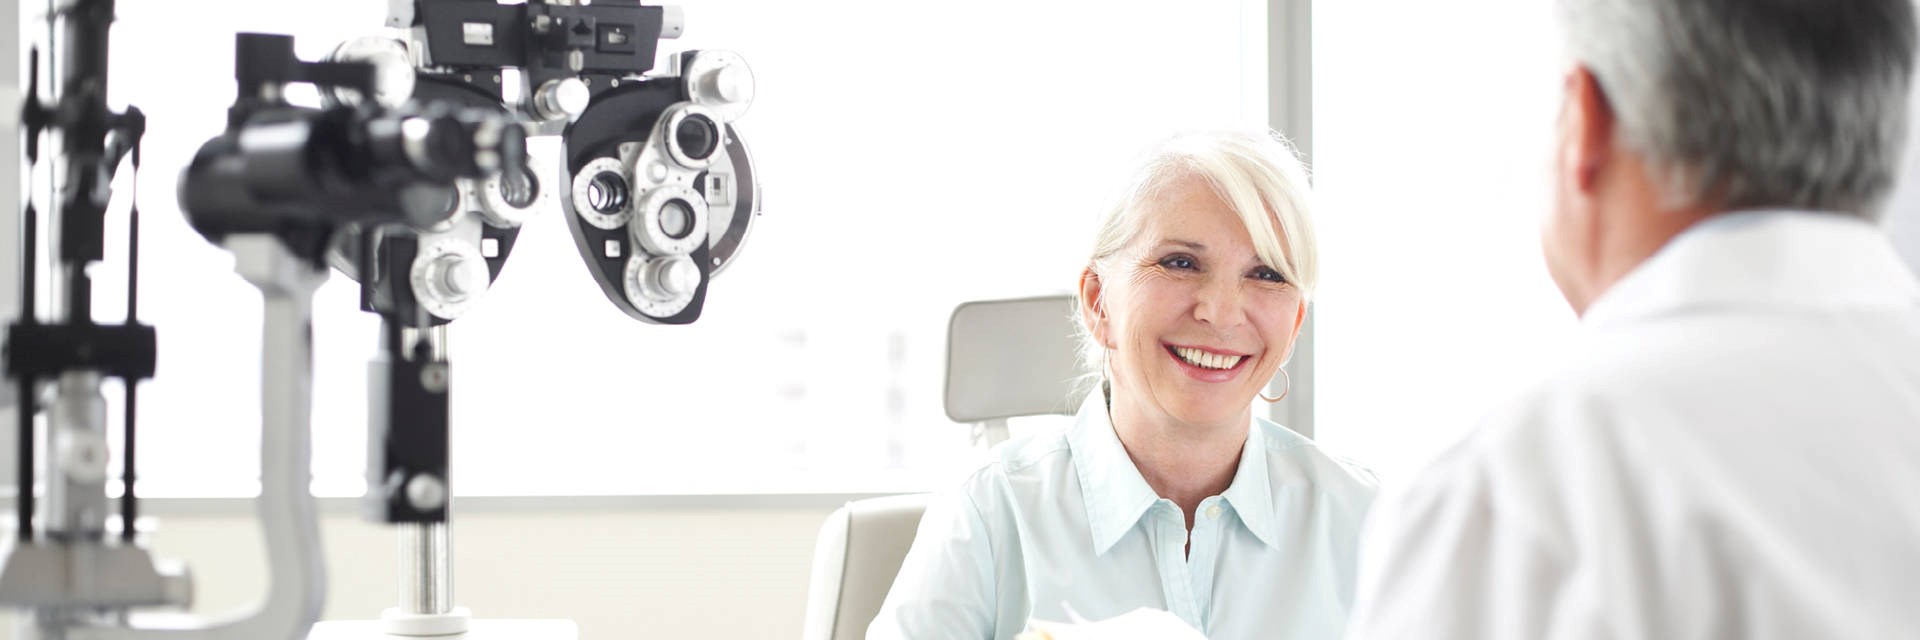 Woman and man in front of optometrist equiment